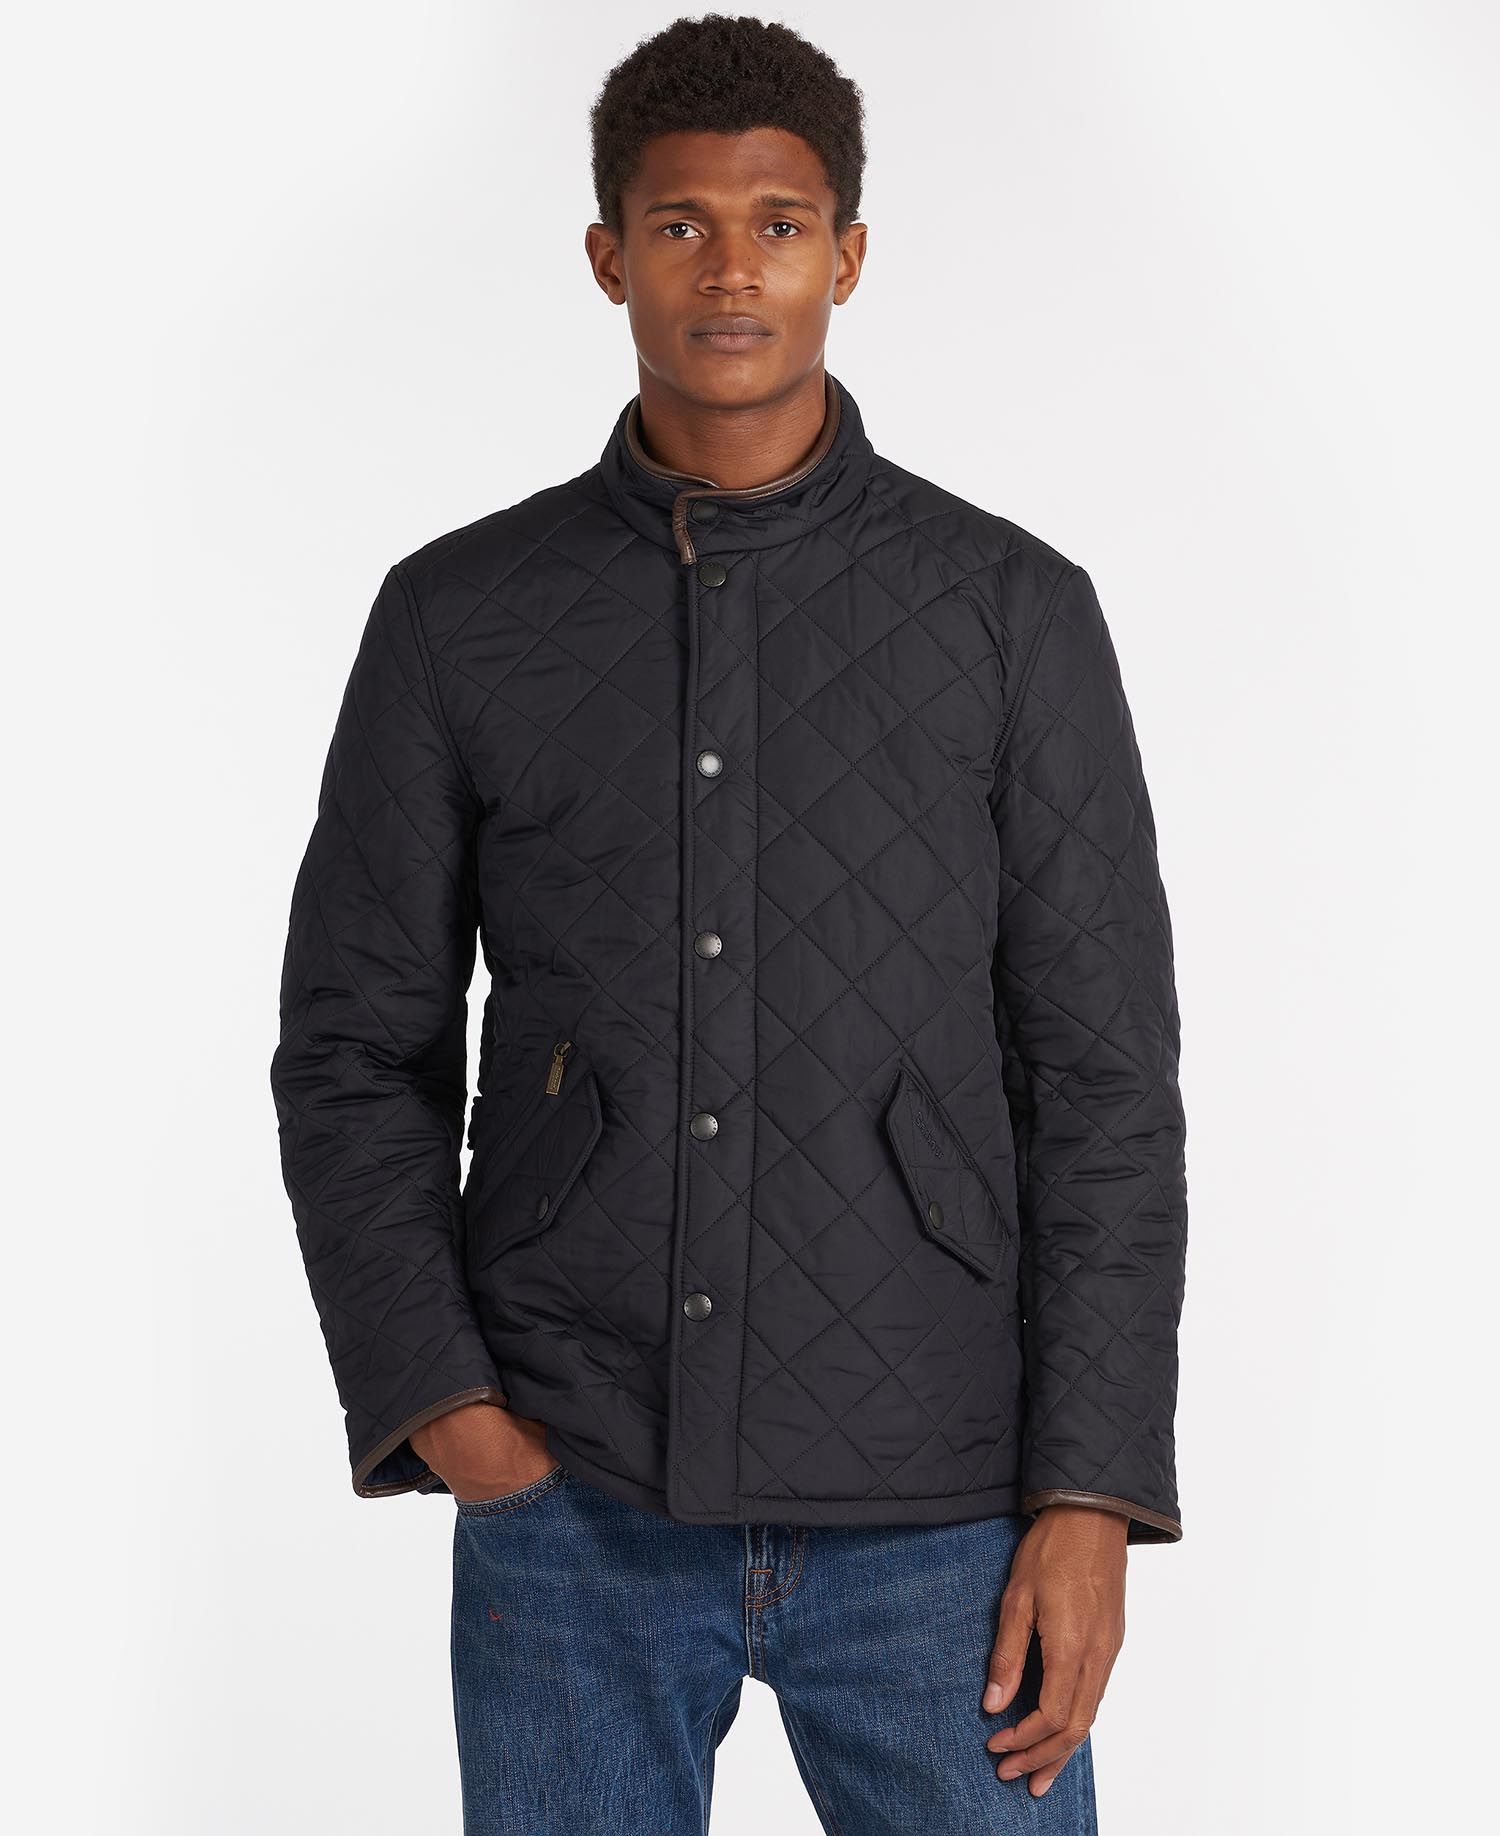 Barbour Powell Quilted jacket | Barbour Quilted Jackets – Sam Turner & Sons